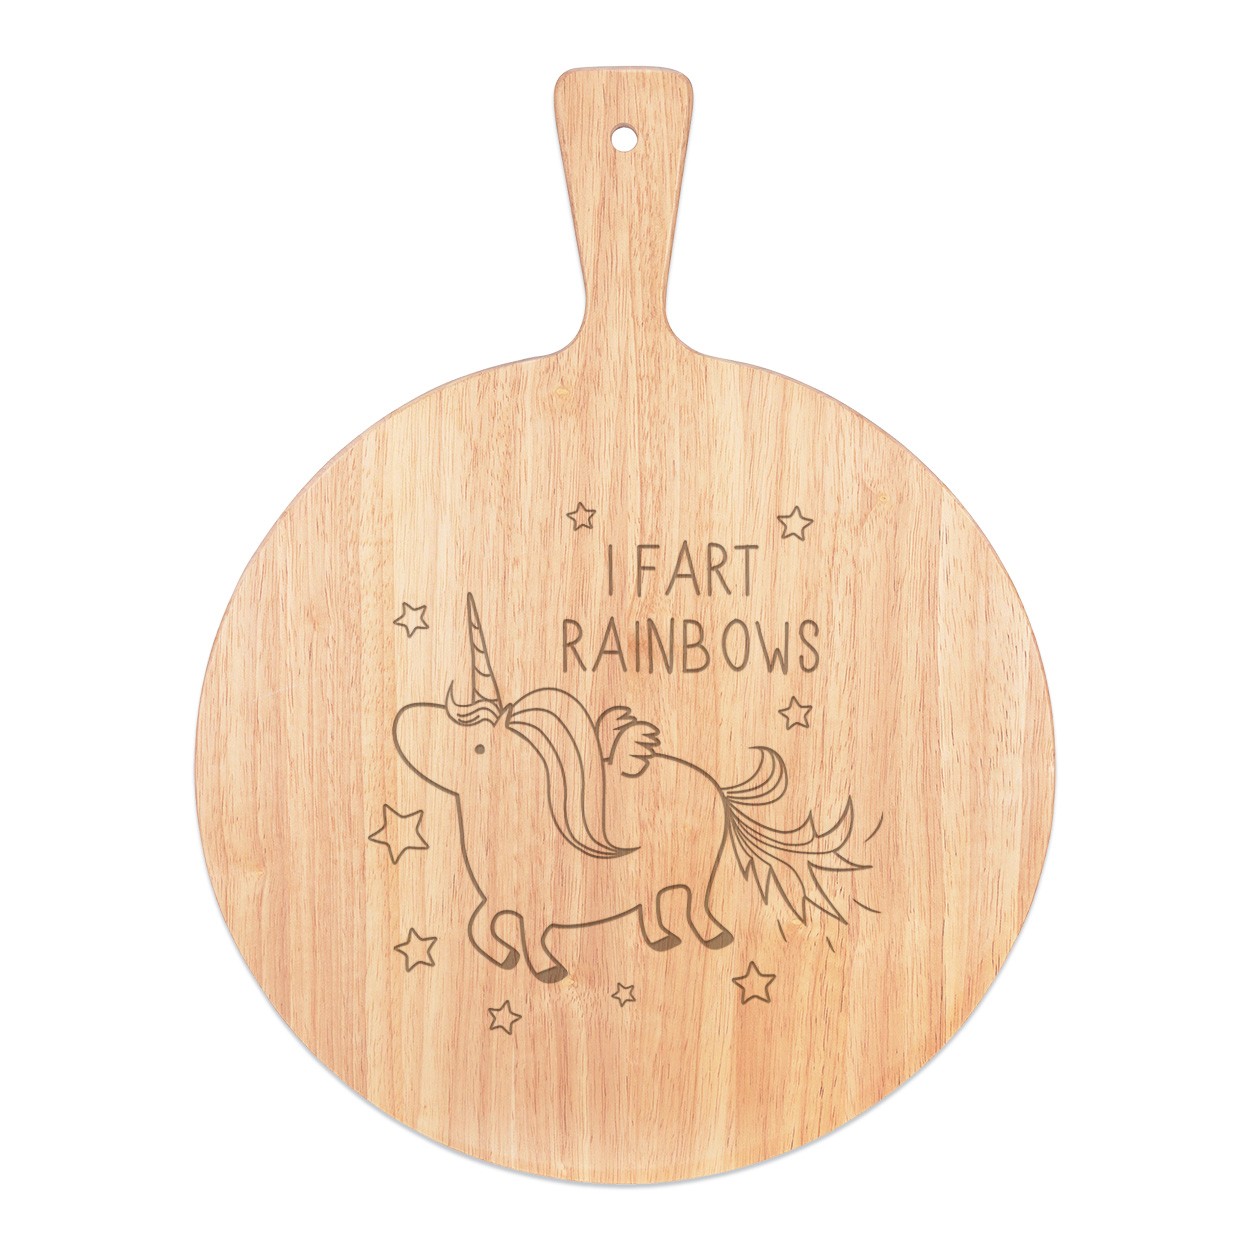 Unicorn I Fart Rainbows Pizza Board Paddle Serving Tray Handle Round Wooden 45x34cm